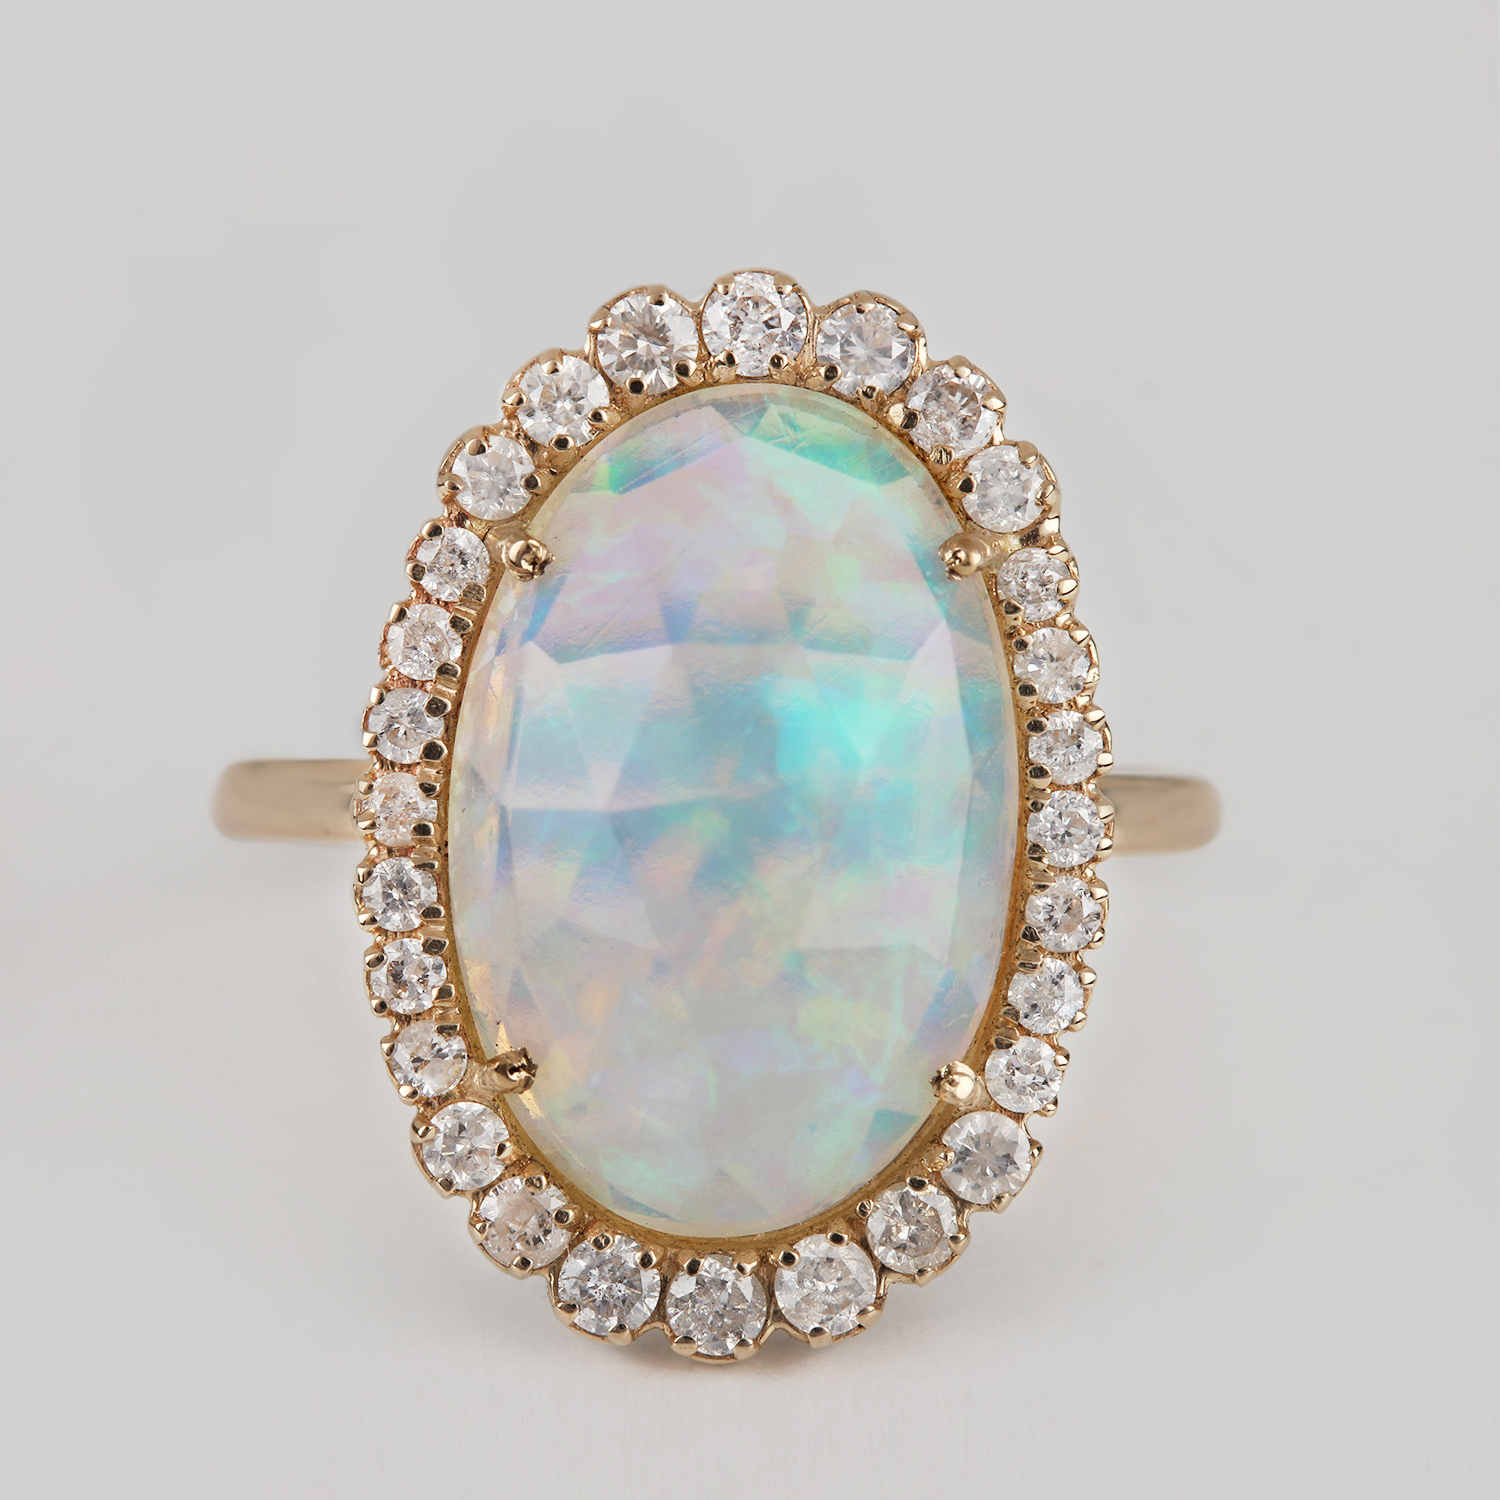 14K Solid Gold Real Pave Diamond Ring Natural Opal Gemstone Jewelry